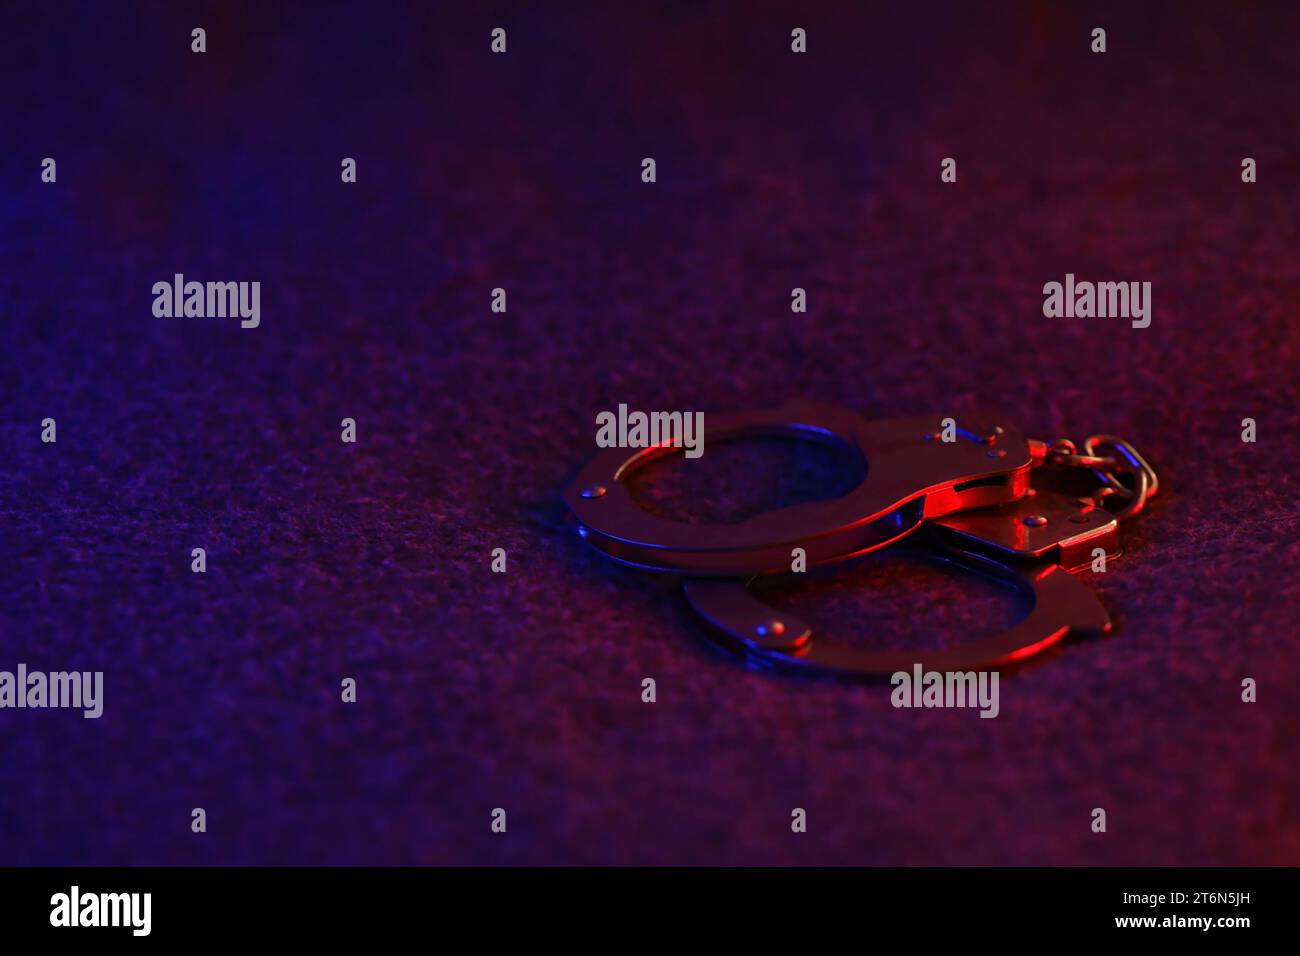 Closed handcuffs on the dark surface at night with police car lights high contrast image Stock Photo